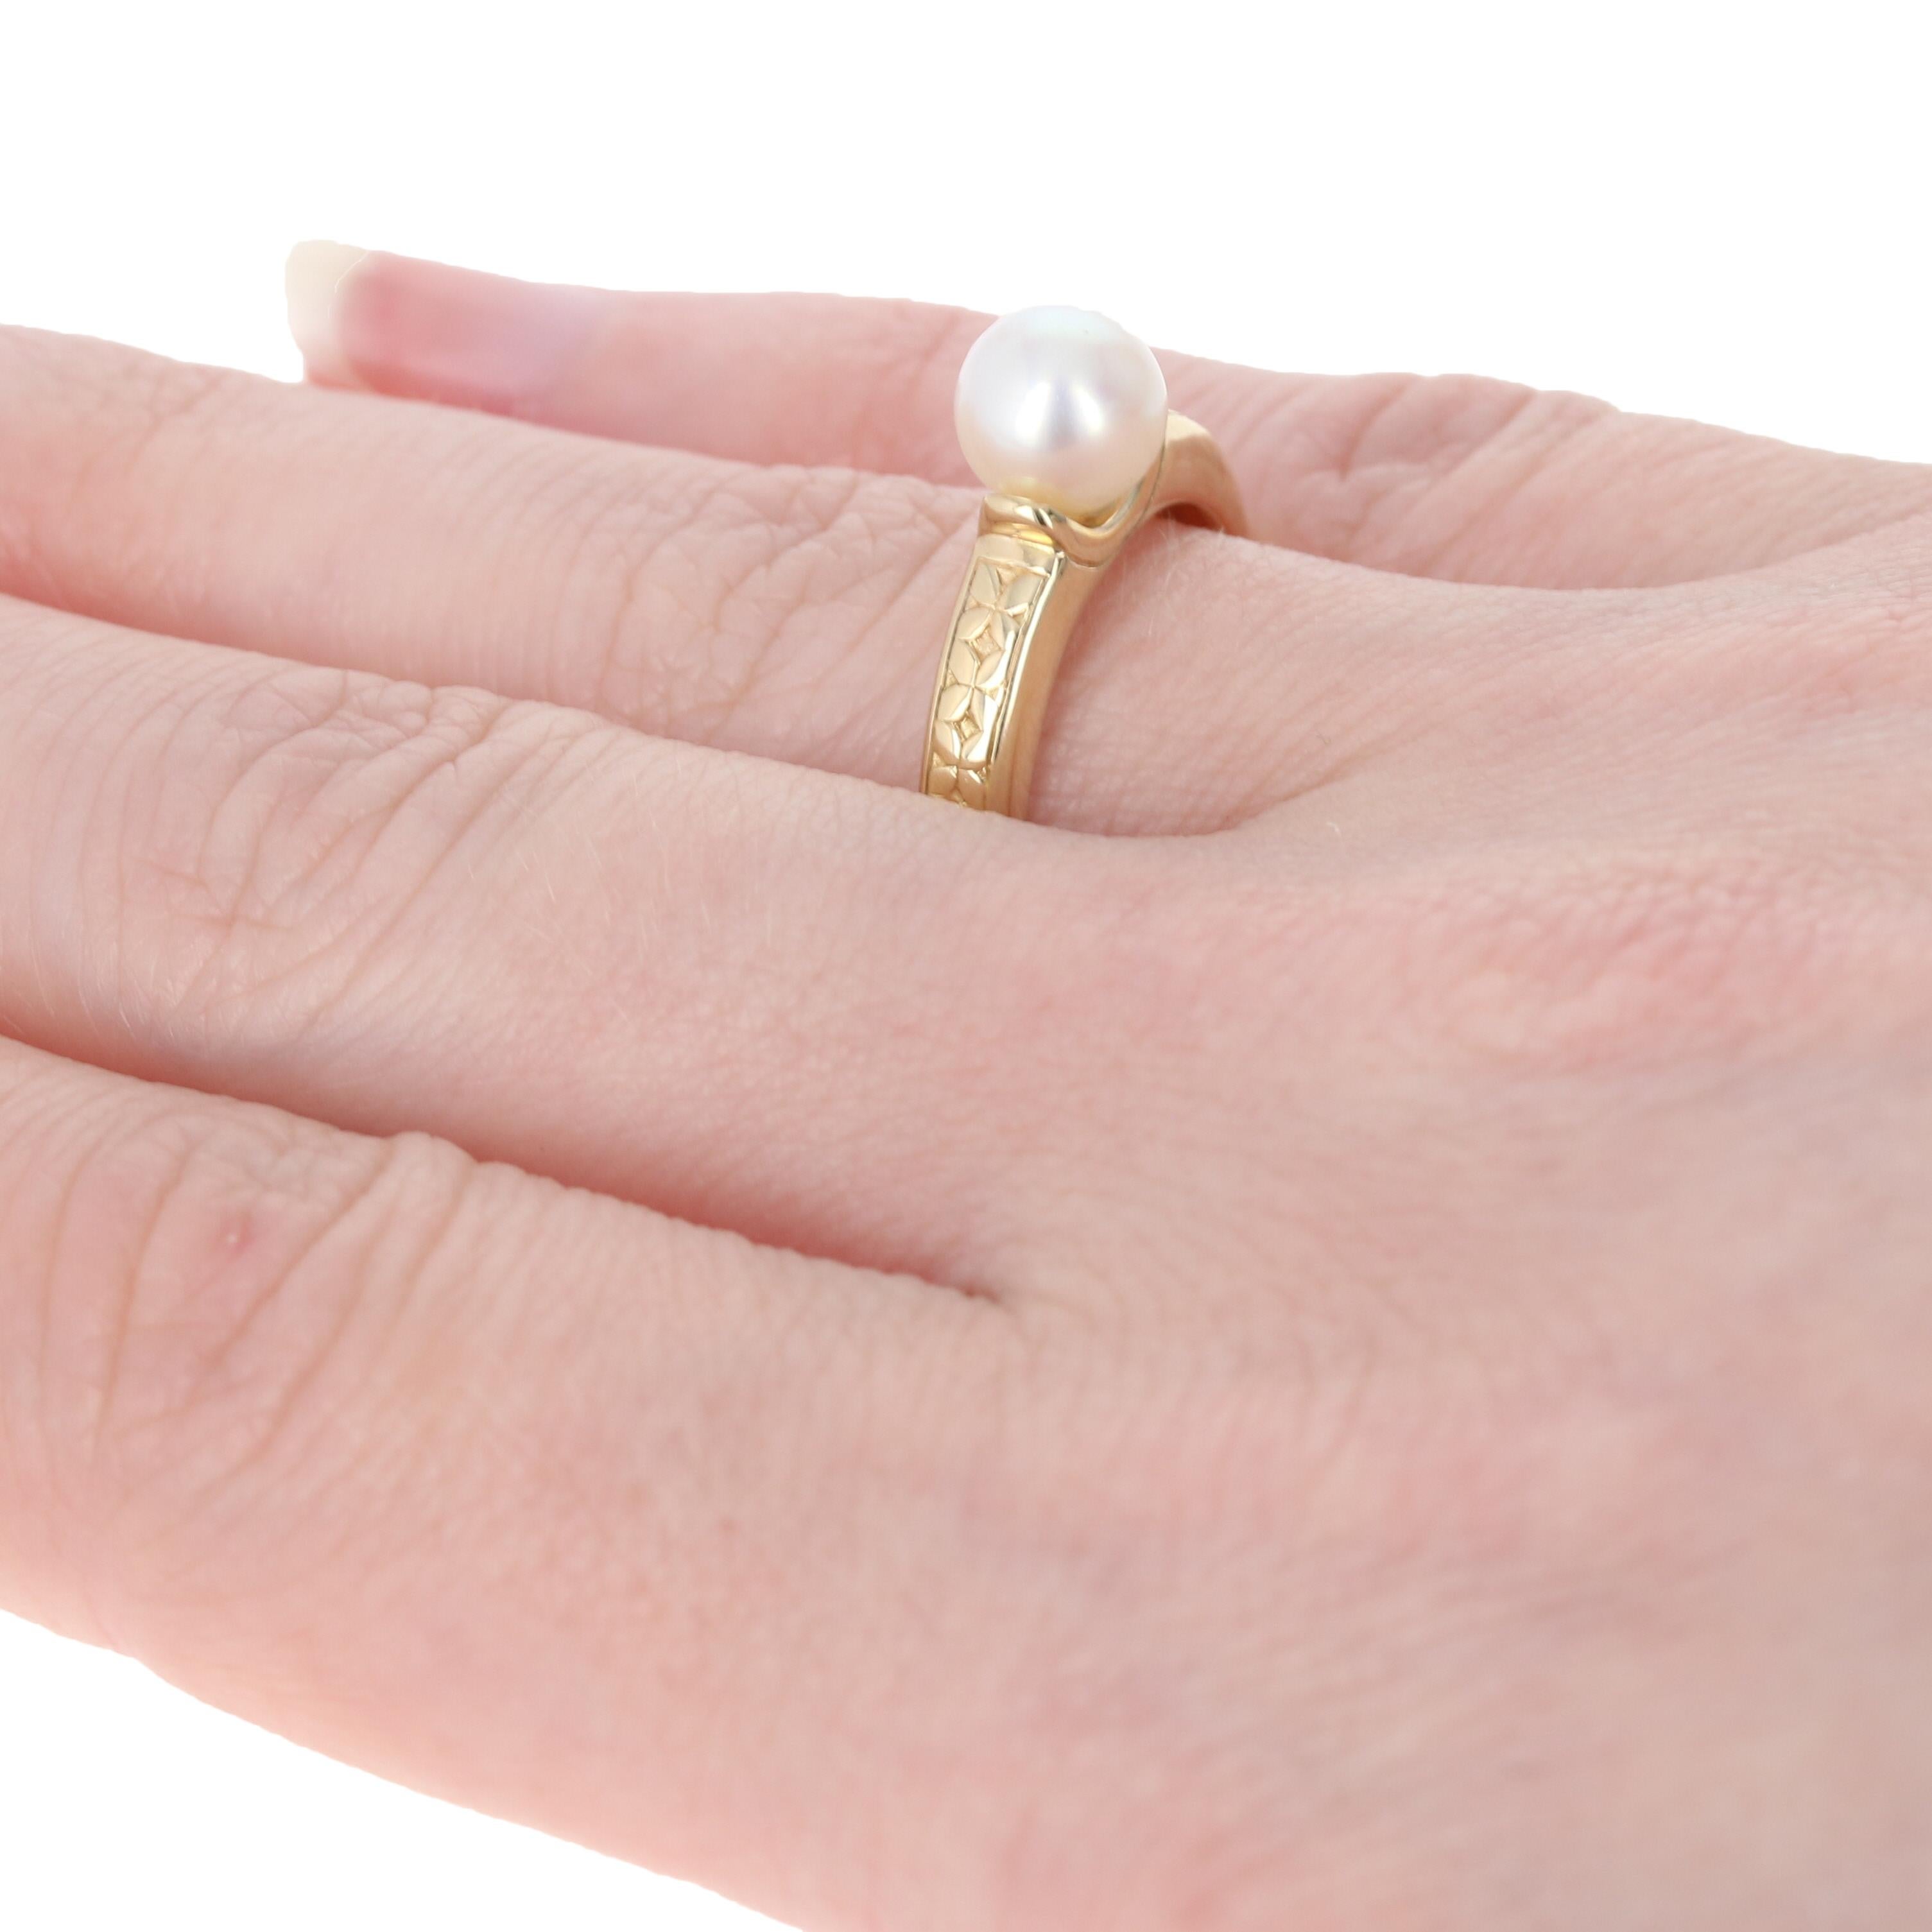 Yellow Gold Akoya Pearl Ring, 18k Solitaire In Excellent Condition For Sale In Greensboro, NC